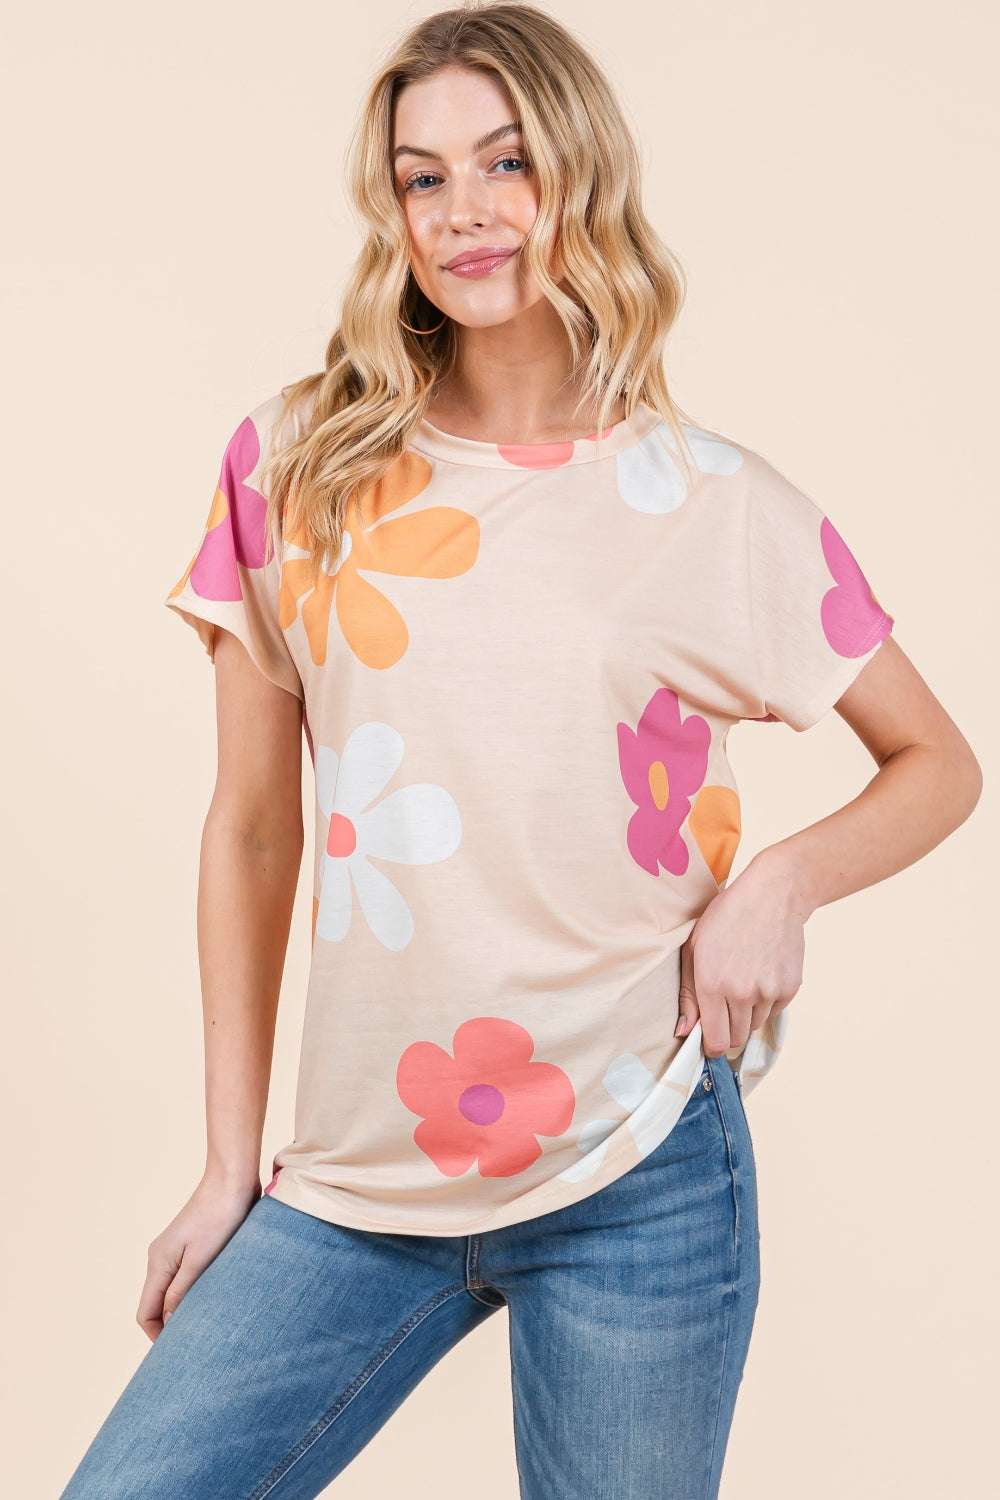 BOMBOM Floral Short SleeveBOMBOM Floral Short Sleeve T-ShirtThe Floral Short Sleeve T-Shirt is a versatile and stylish piece for your casual wardrobe. Featuring a floral print design, this t-shirt adds a touch of femininity aClothingTrendsiLive Online MallBOMBOM Floral Short Sleeve